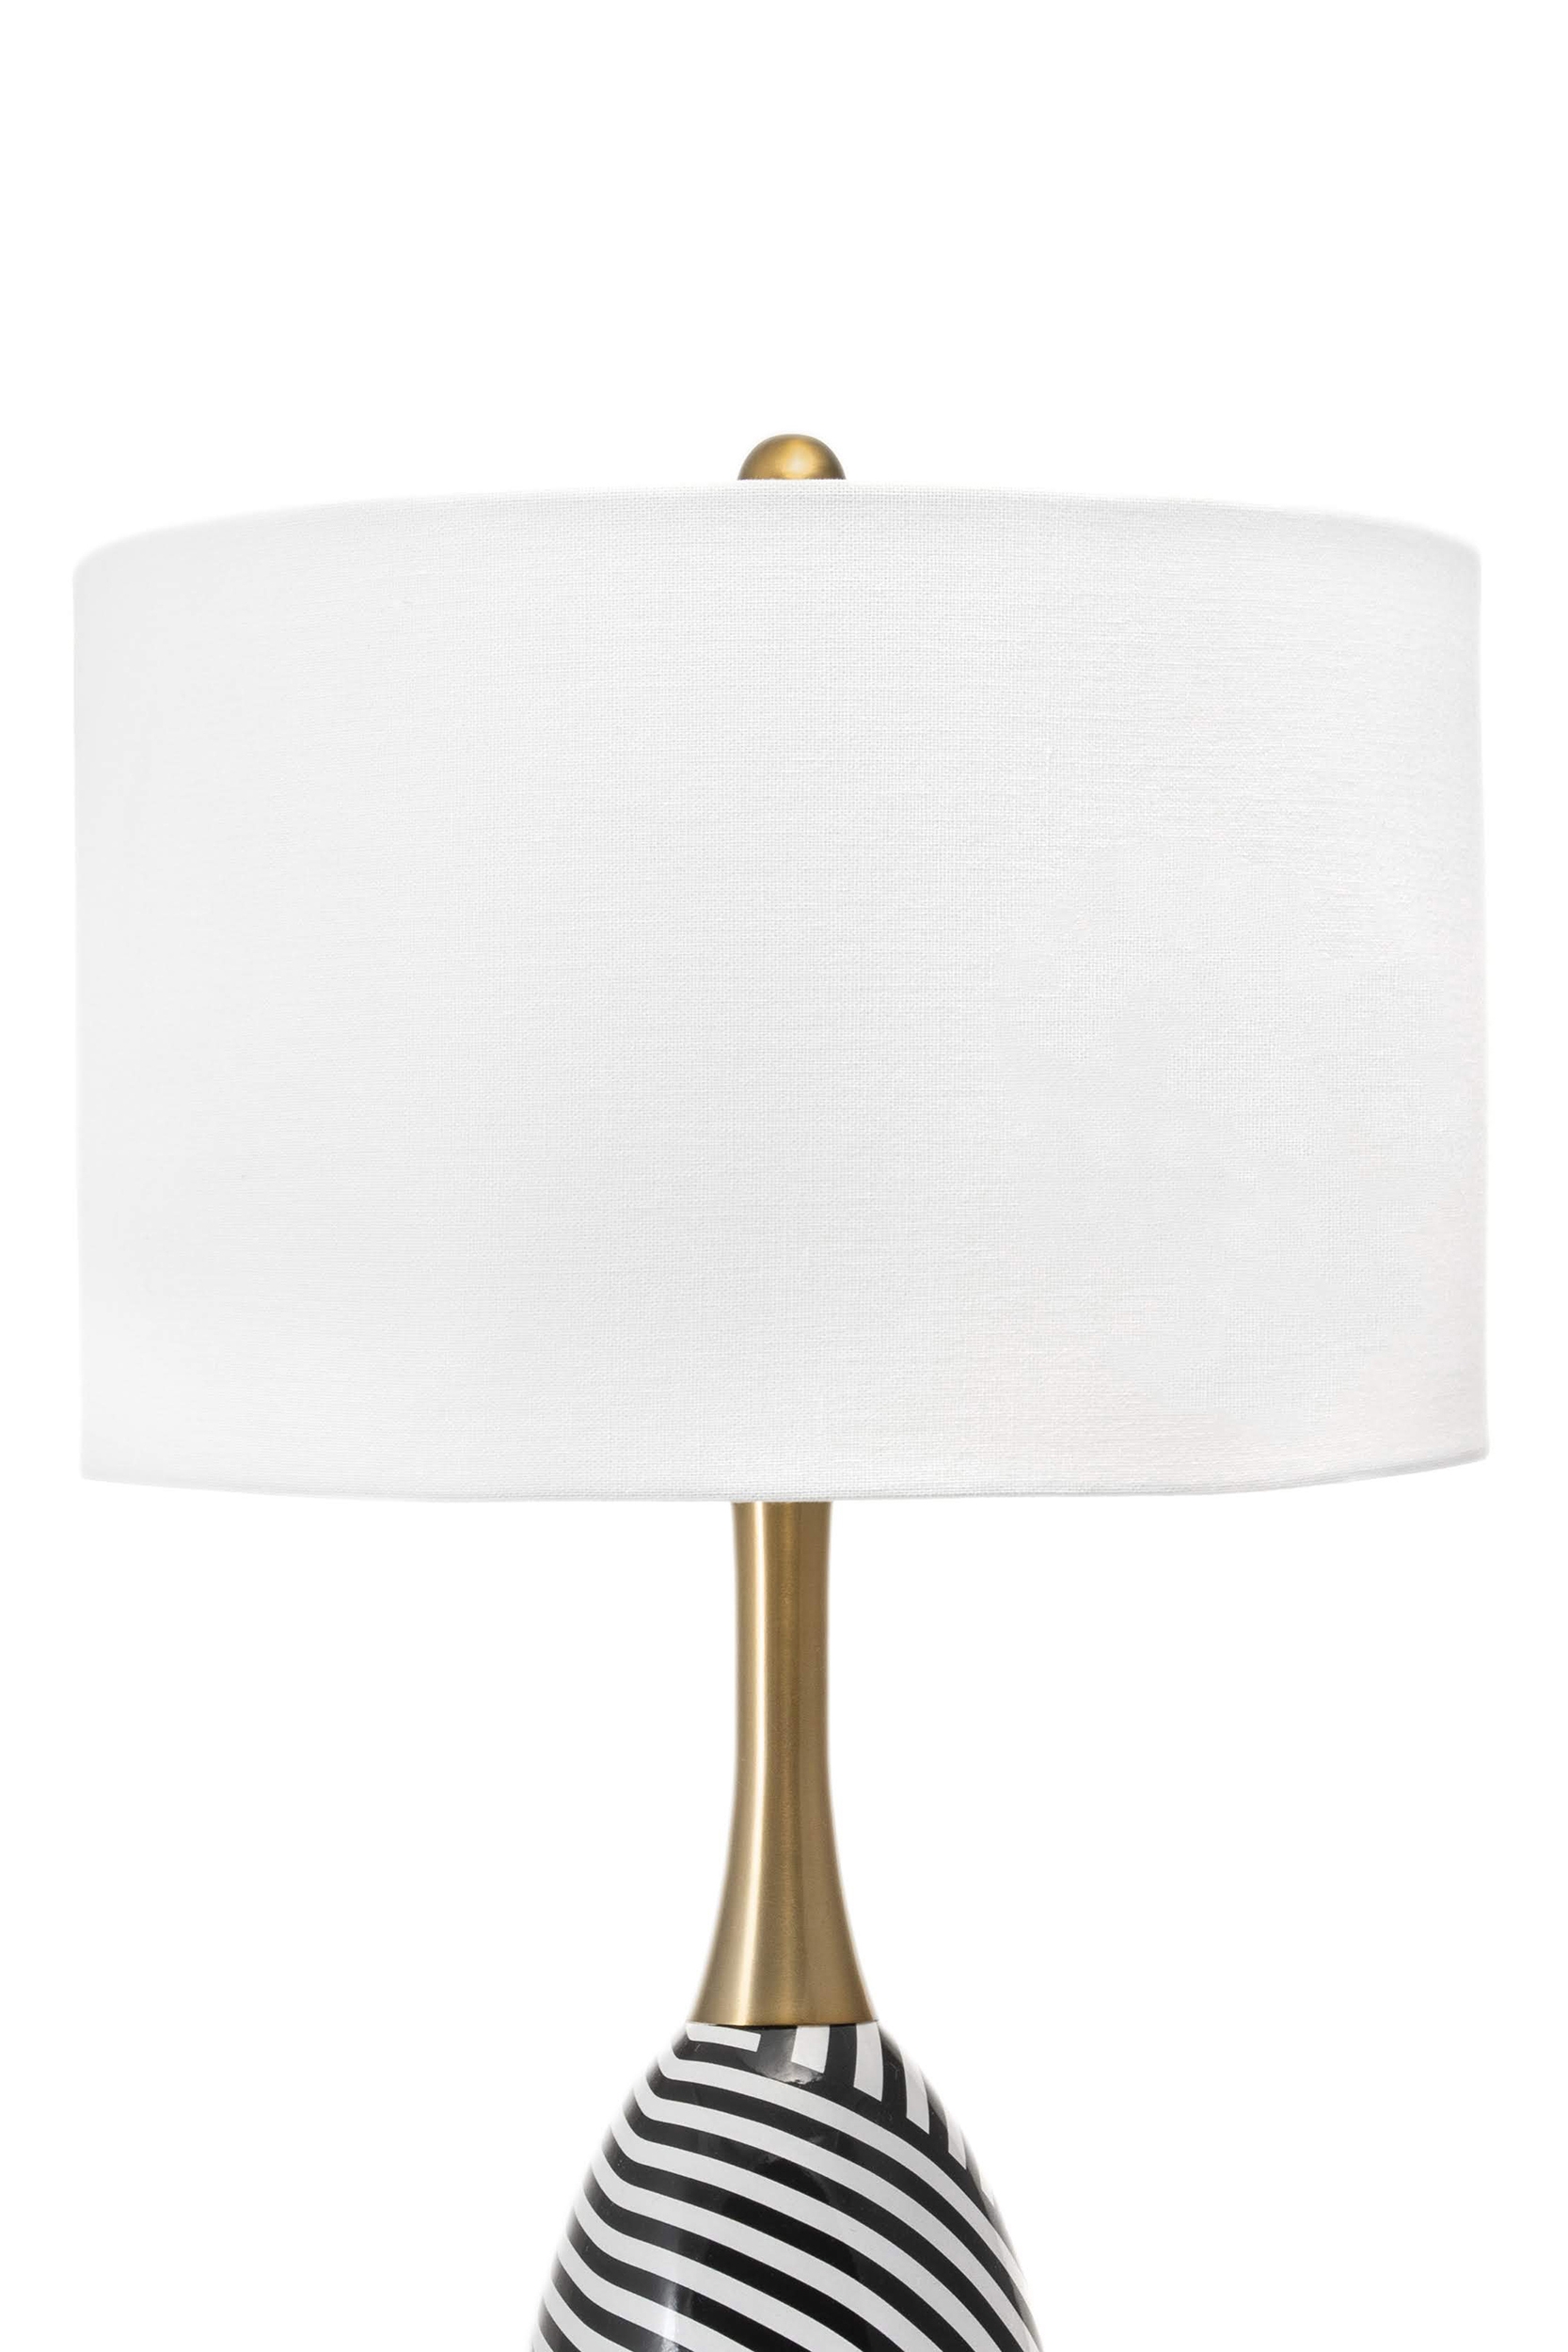 Ortley Iron Table Lamp, 24" - Image 3